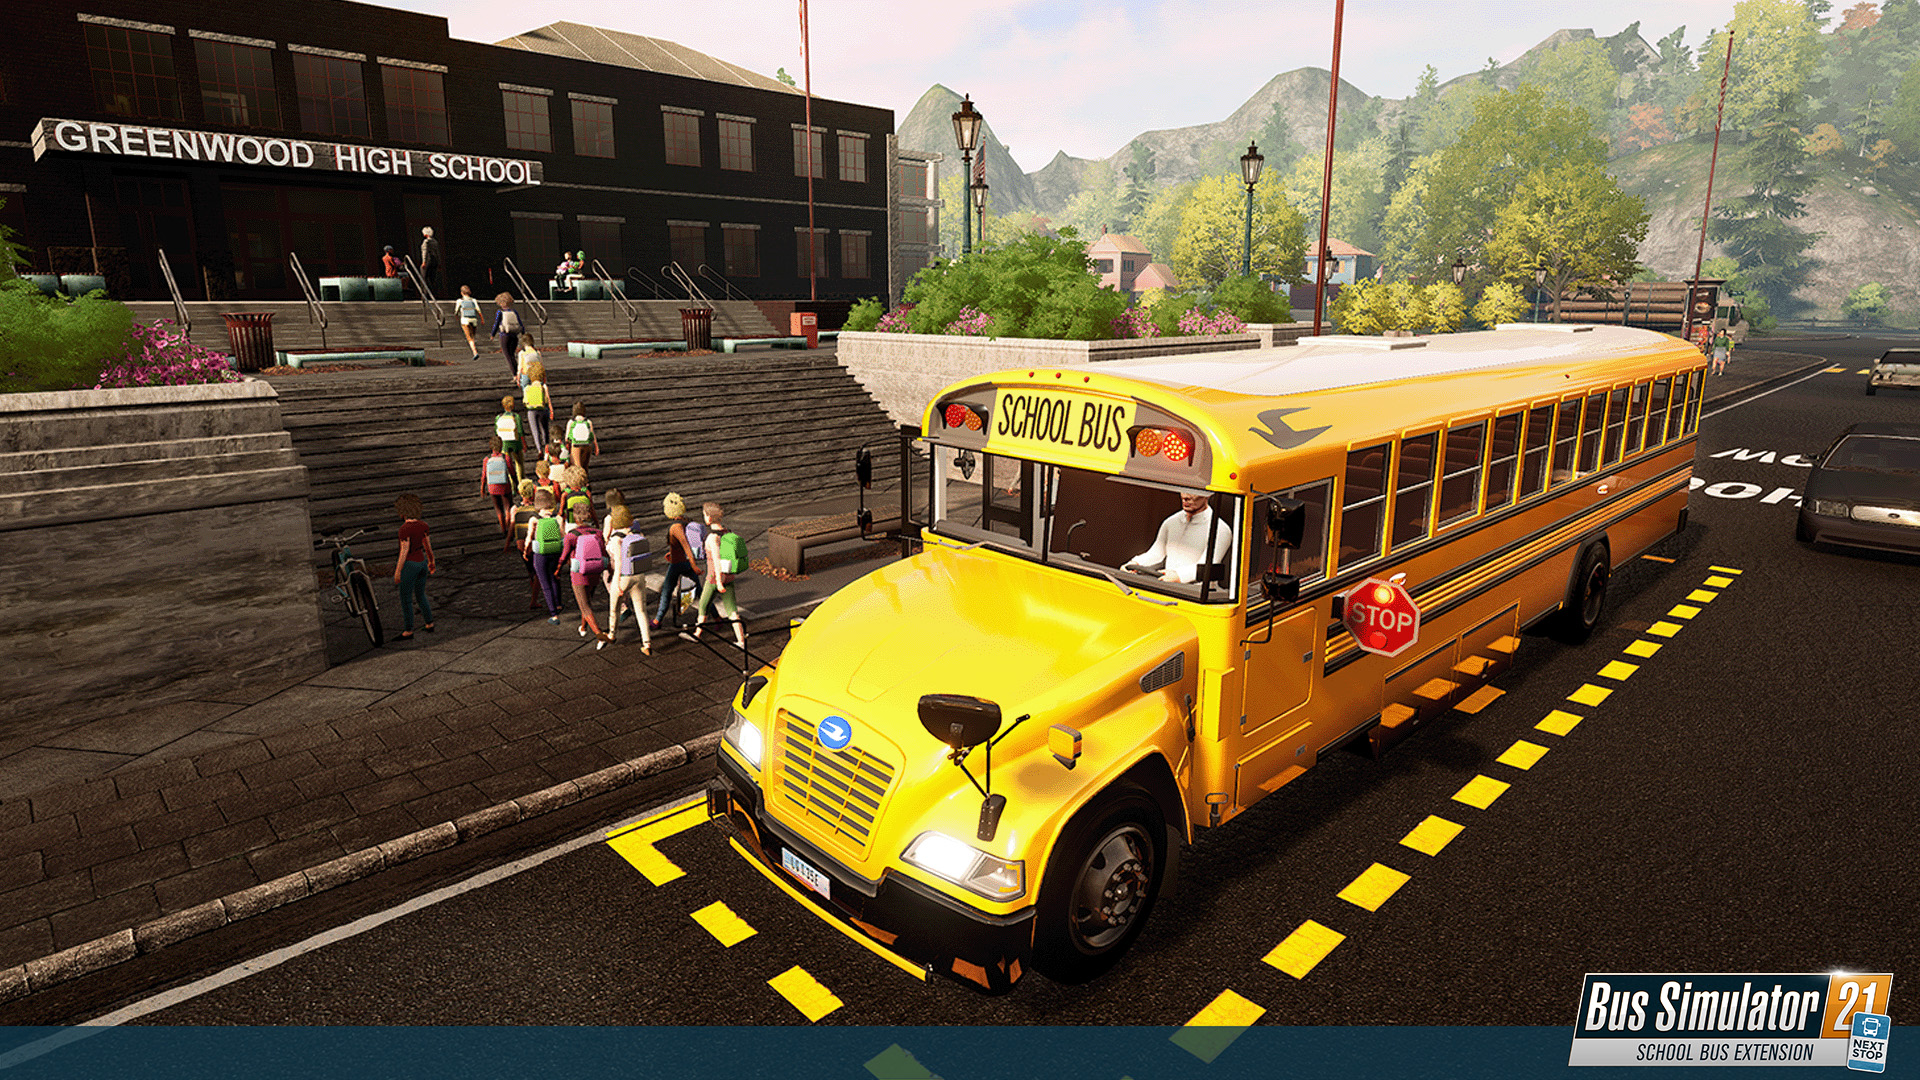 Official School Bus Extension